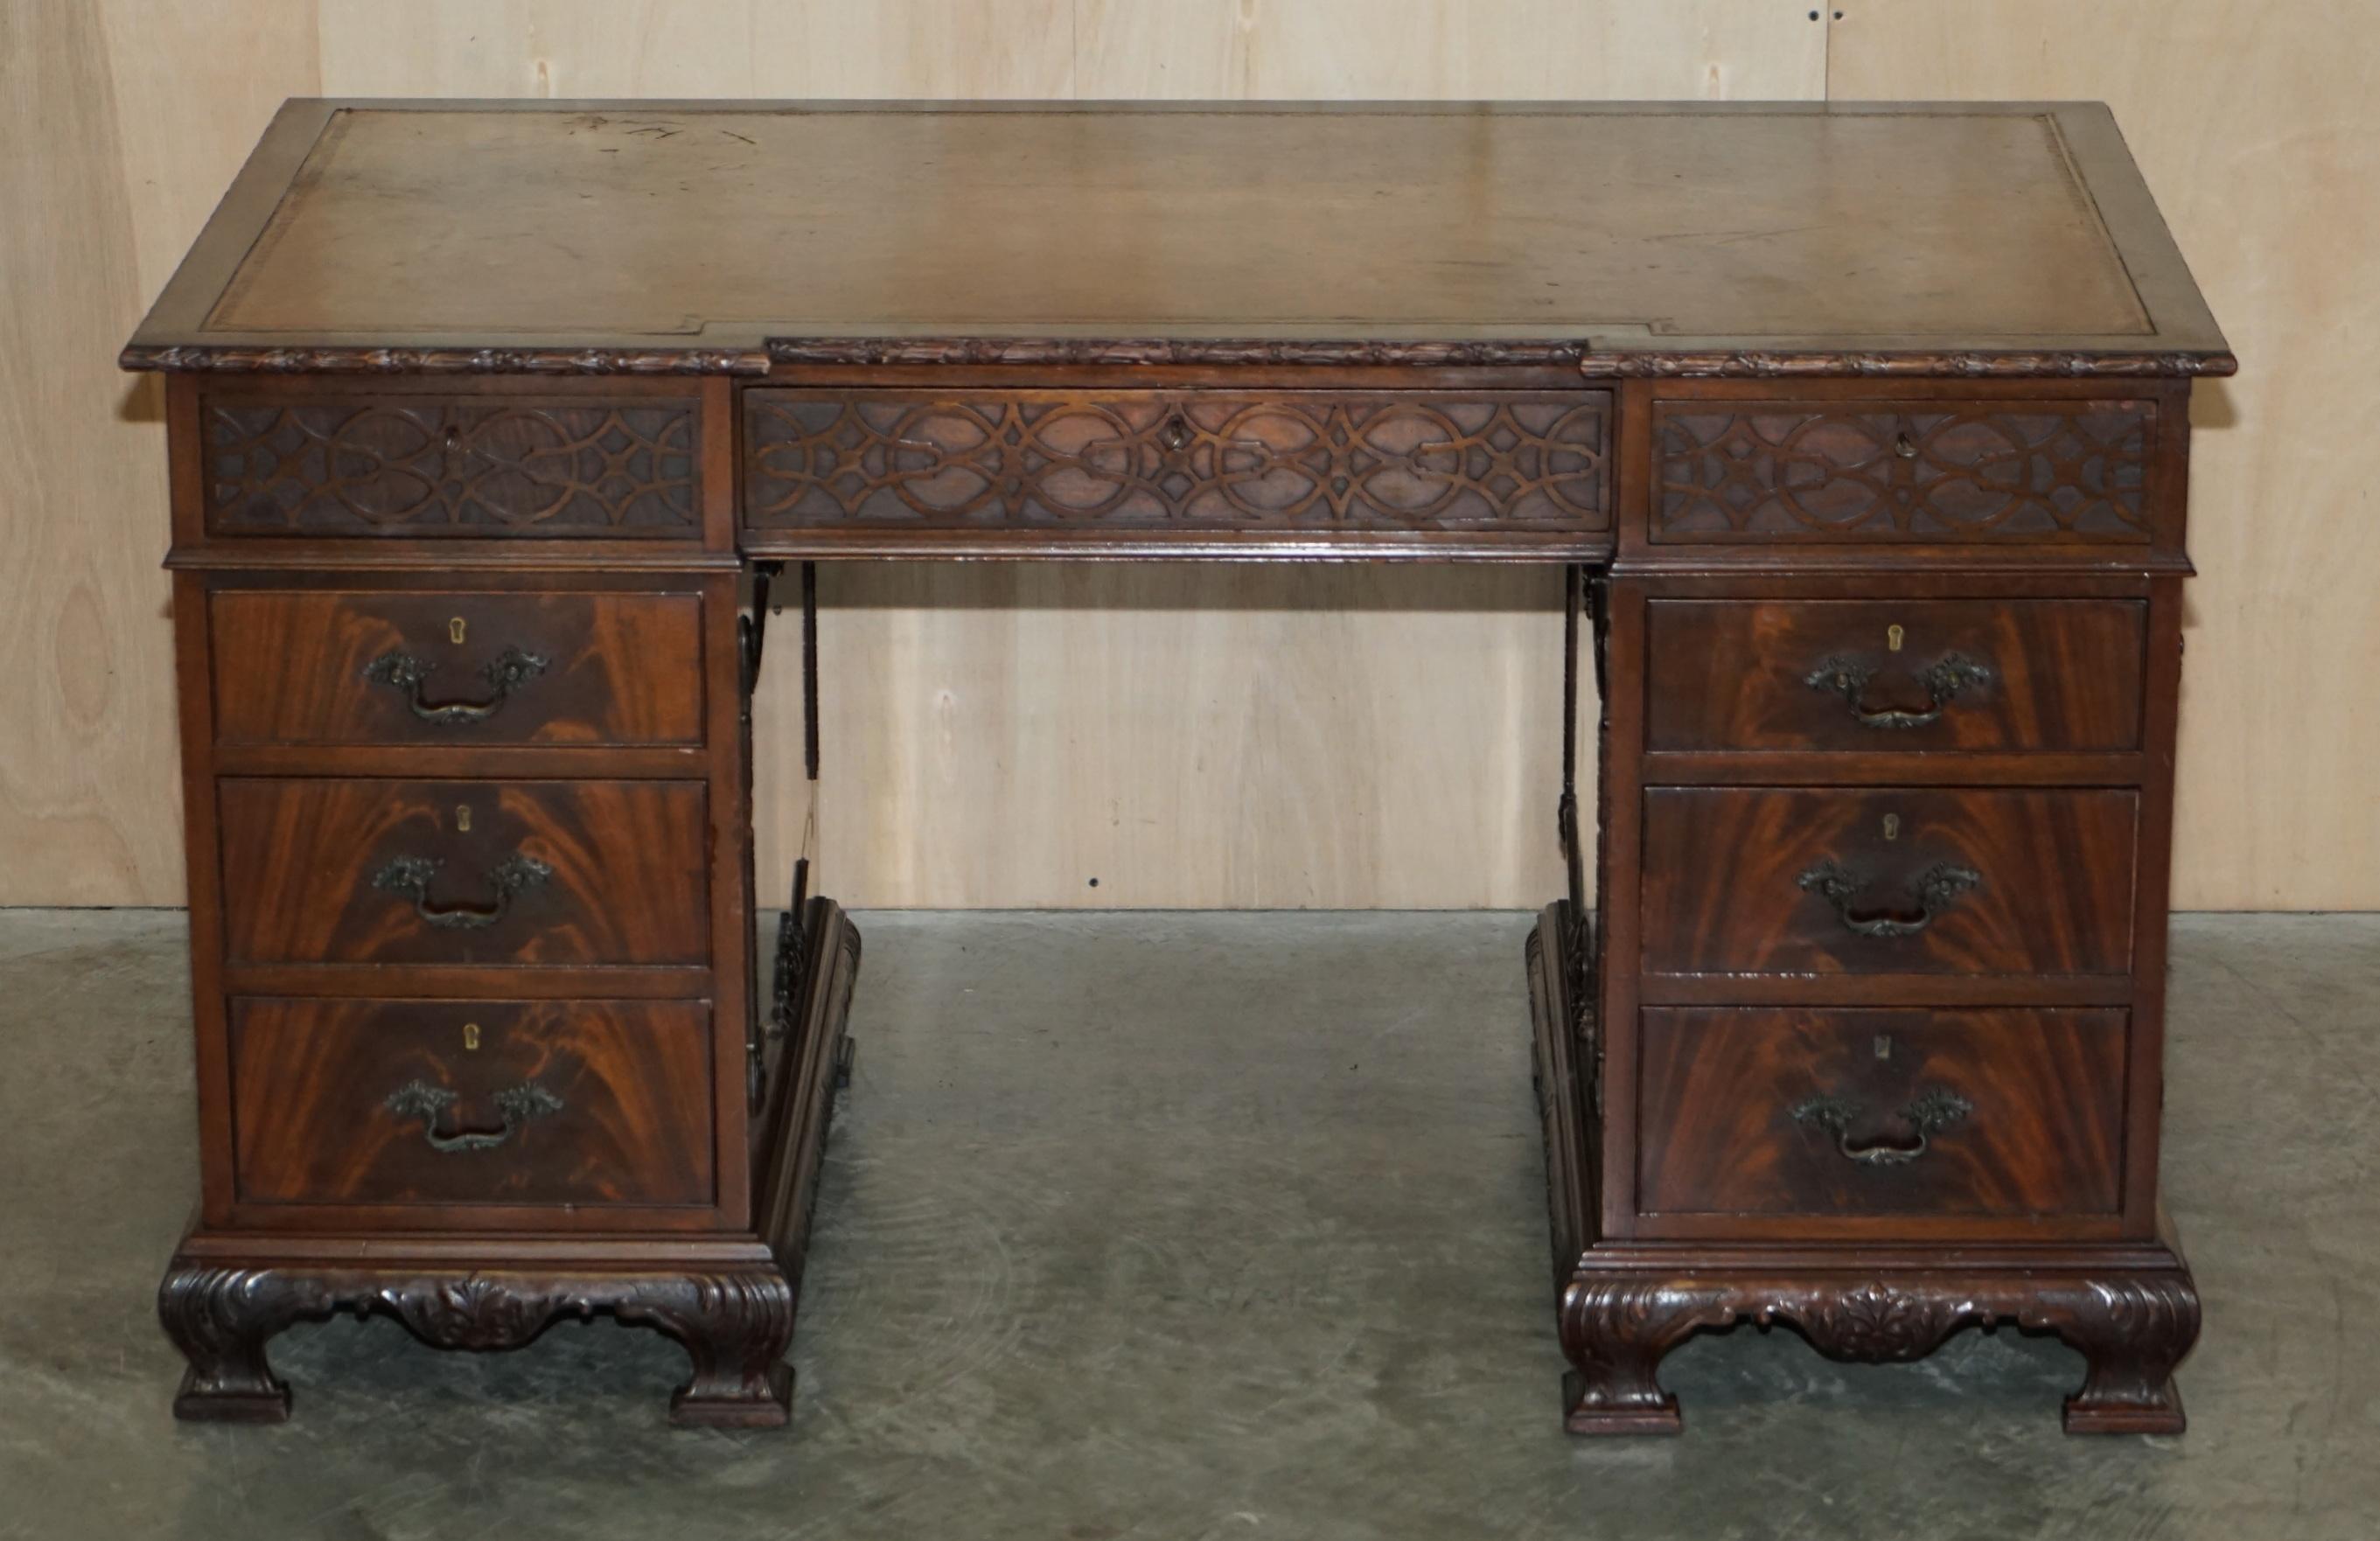 We are delighted to offer this lovely flamed mahogany, Thomas Chippendale Revival twin pedestal, partner desk with Regency brown Leather top and inverted breakfront 

A very good looking and well made desk, it is a copy of an original Thomas